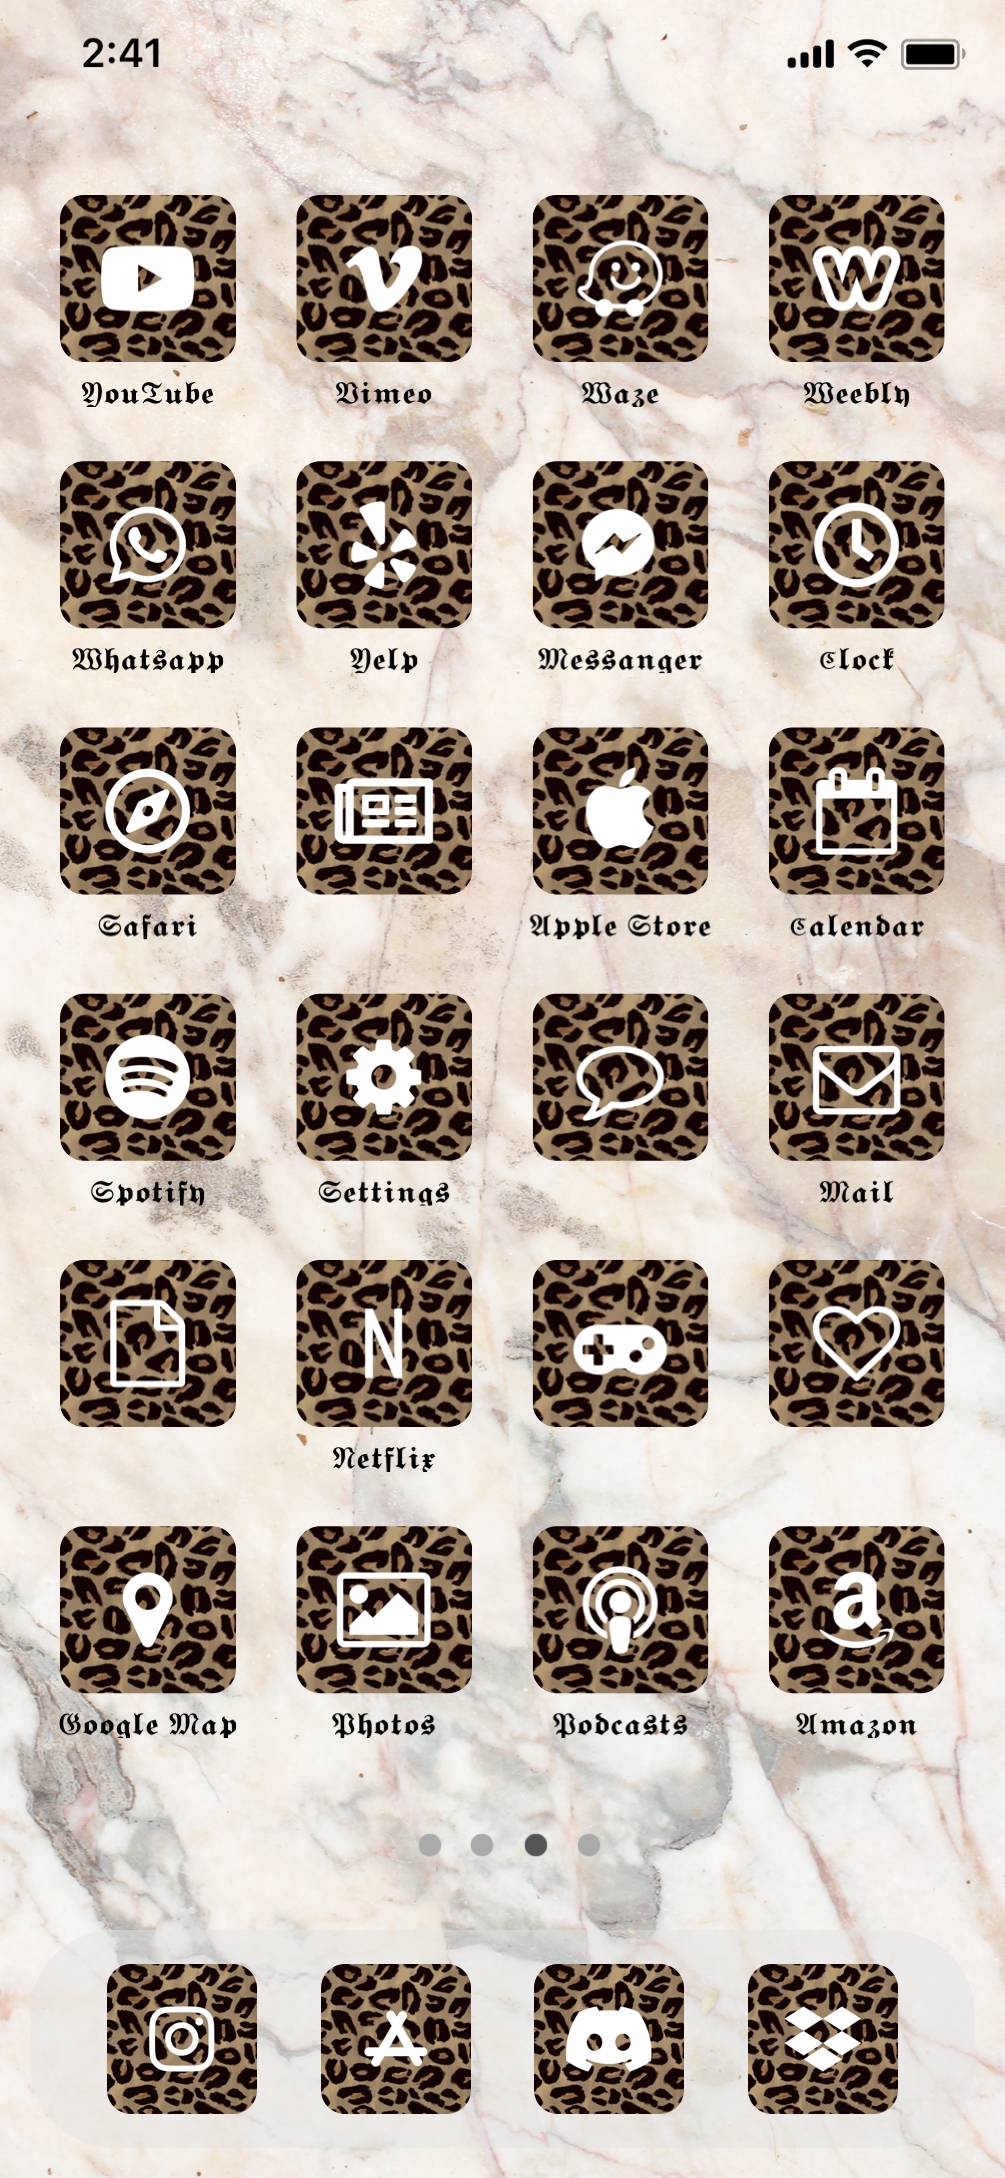 Leopard home screen theme ホーム画面カスタマイズ